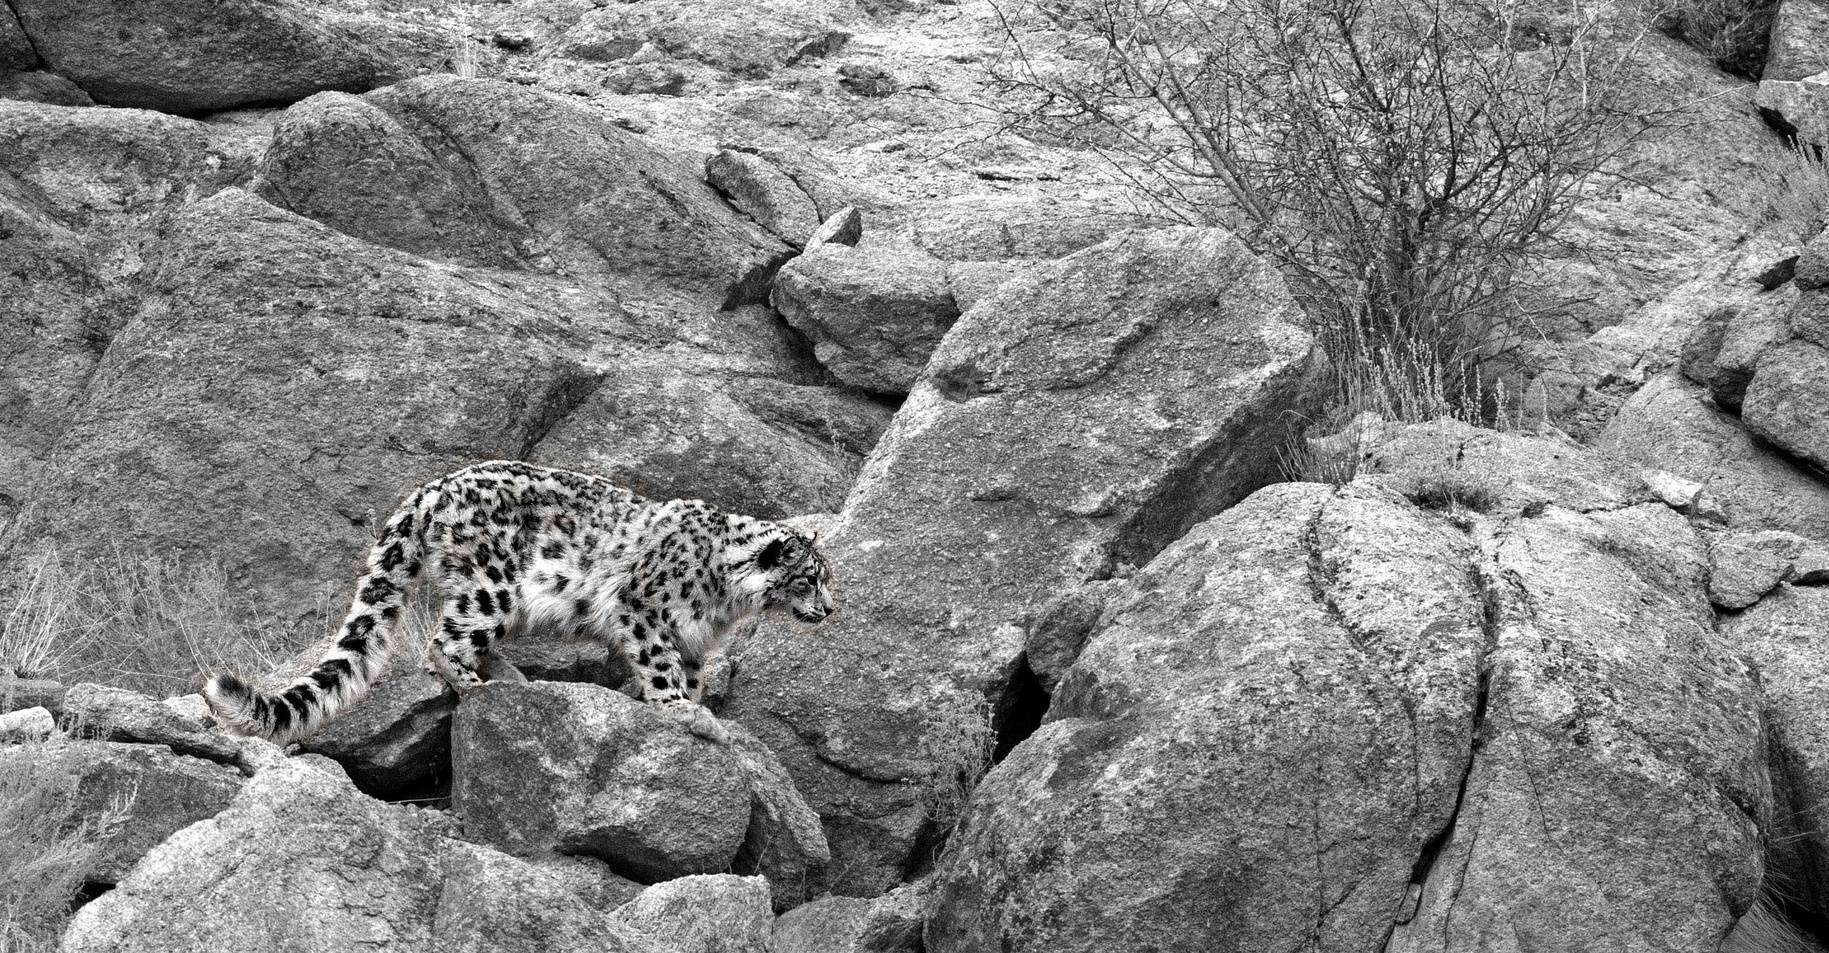 Snow leopard among boulders in the Himalayas